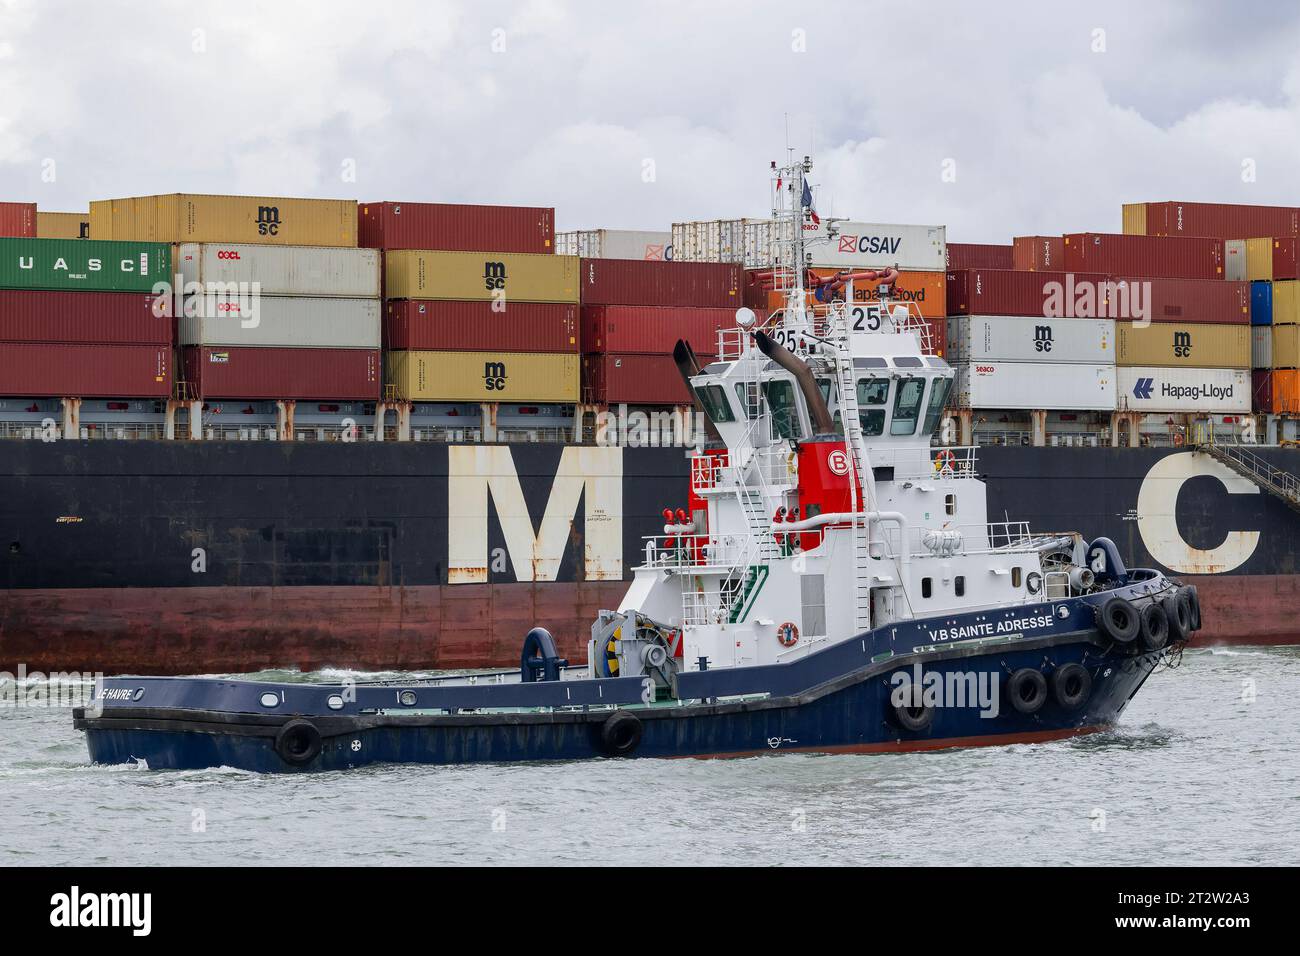 Le Havre, France - Harbour tug VB SAINTE ADRESSE crosses in front of a container ship at port of Le Havre. Stock Photo